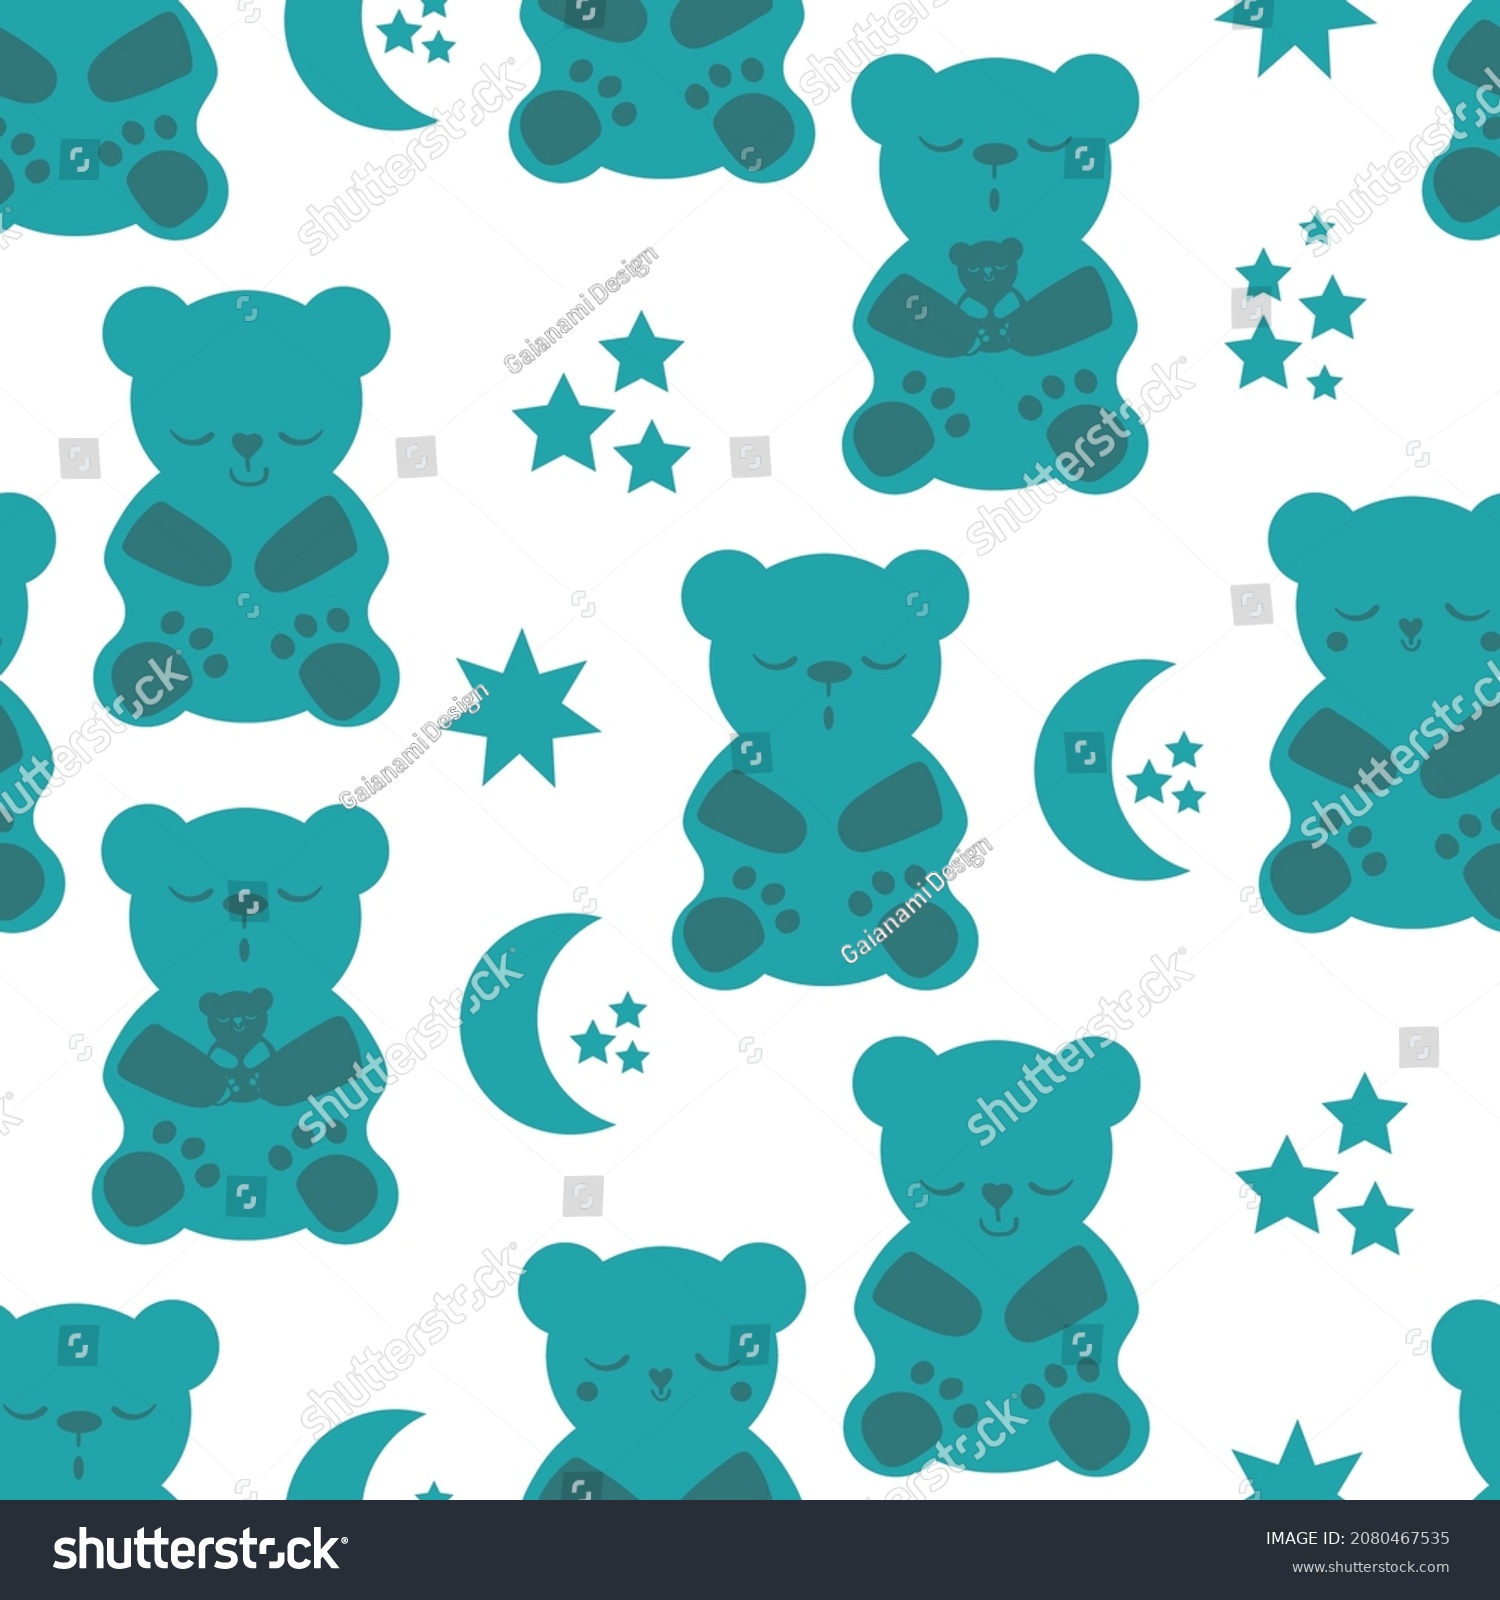 SVG of Cute sleep gummies stars moon vector seamless pattern background. Backdrop with blue green sleepy gummy bears and celestial shapes. Kawaii style characters for sleeping well, health concept. svg